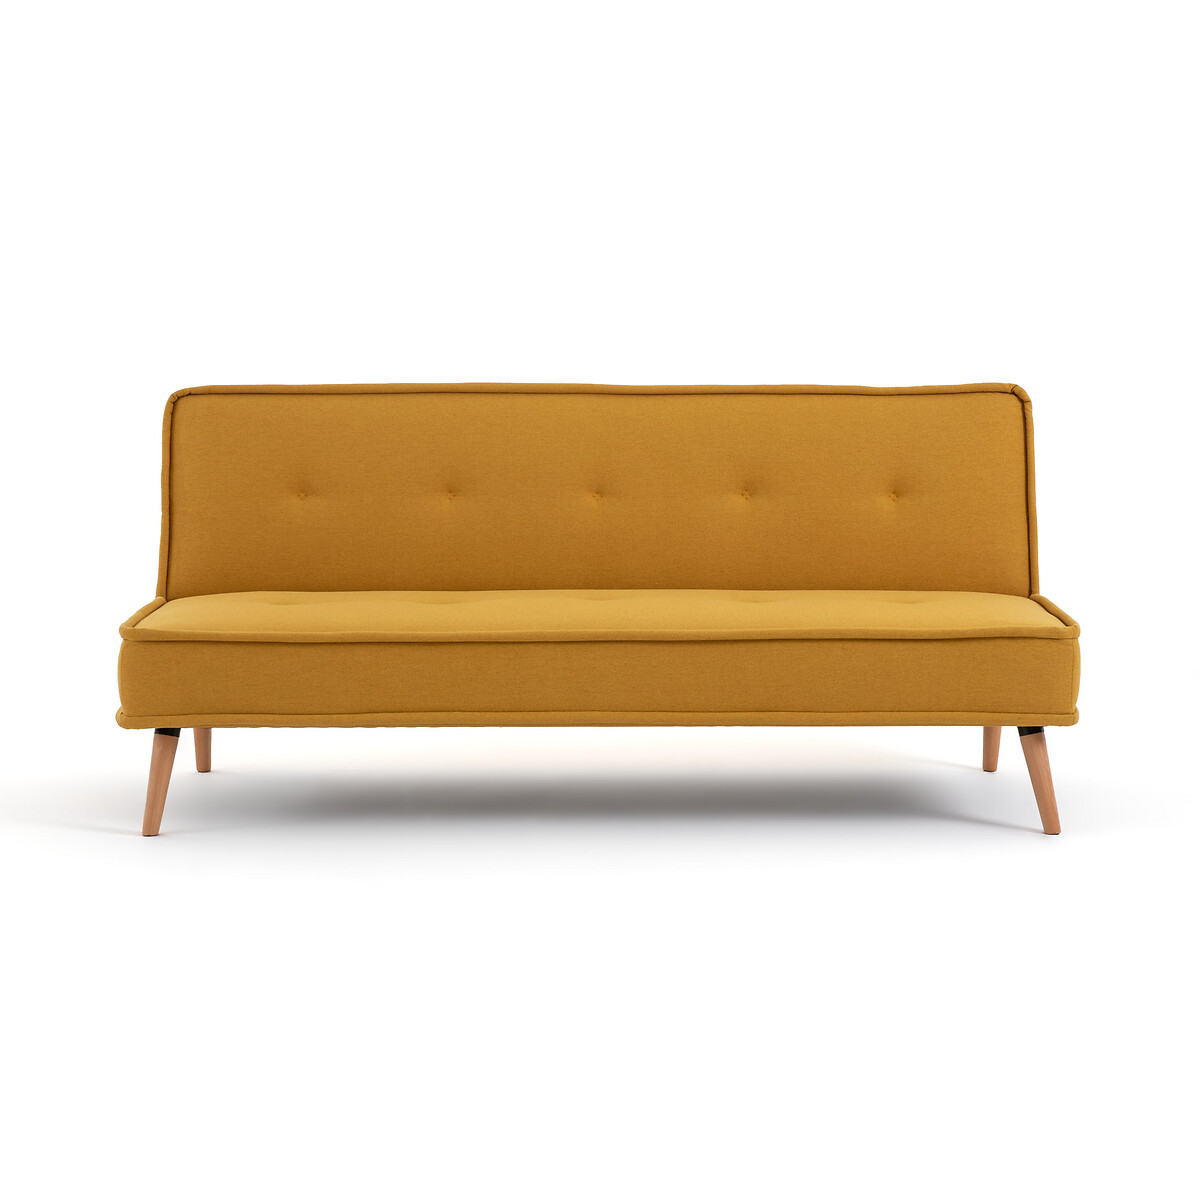 Banquette-lit, polyester Juno